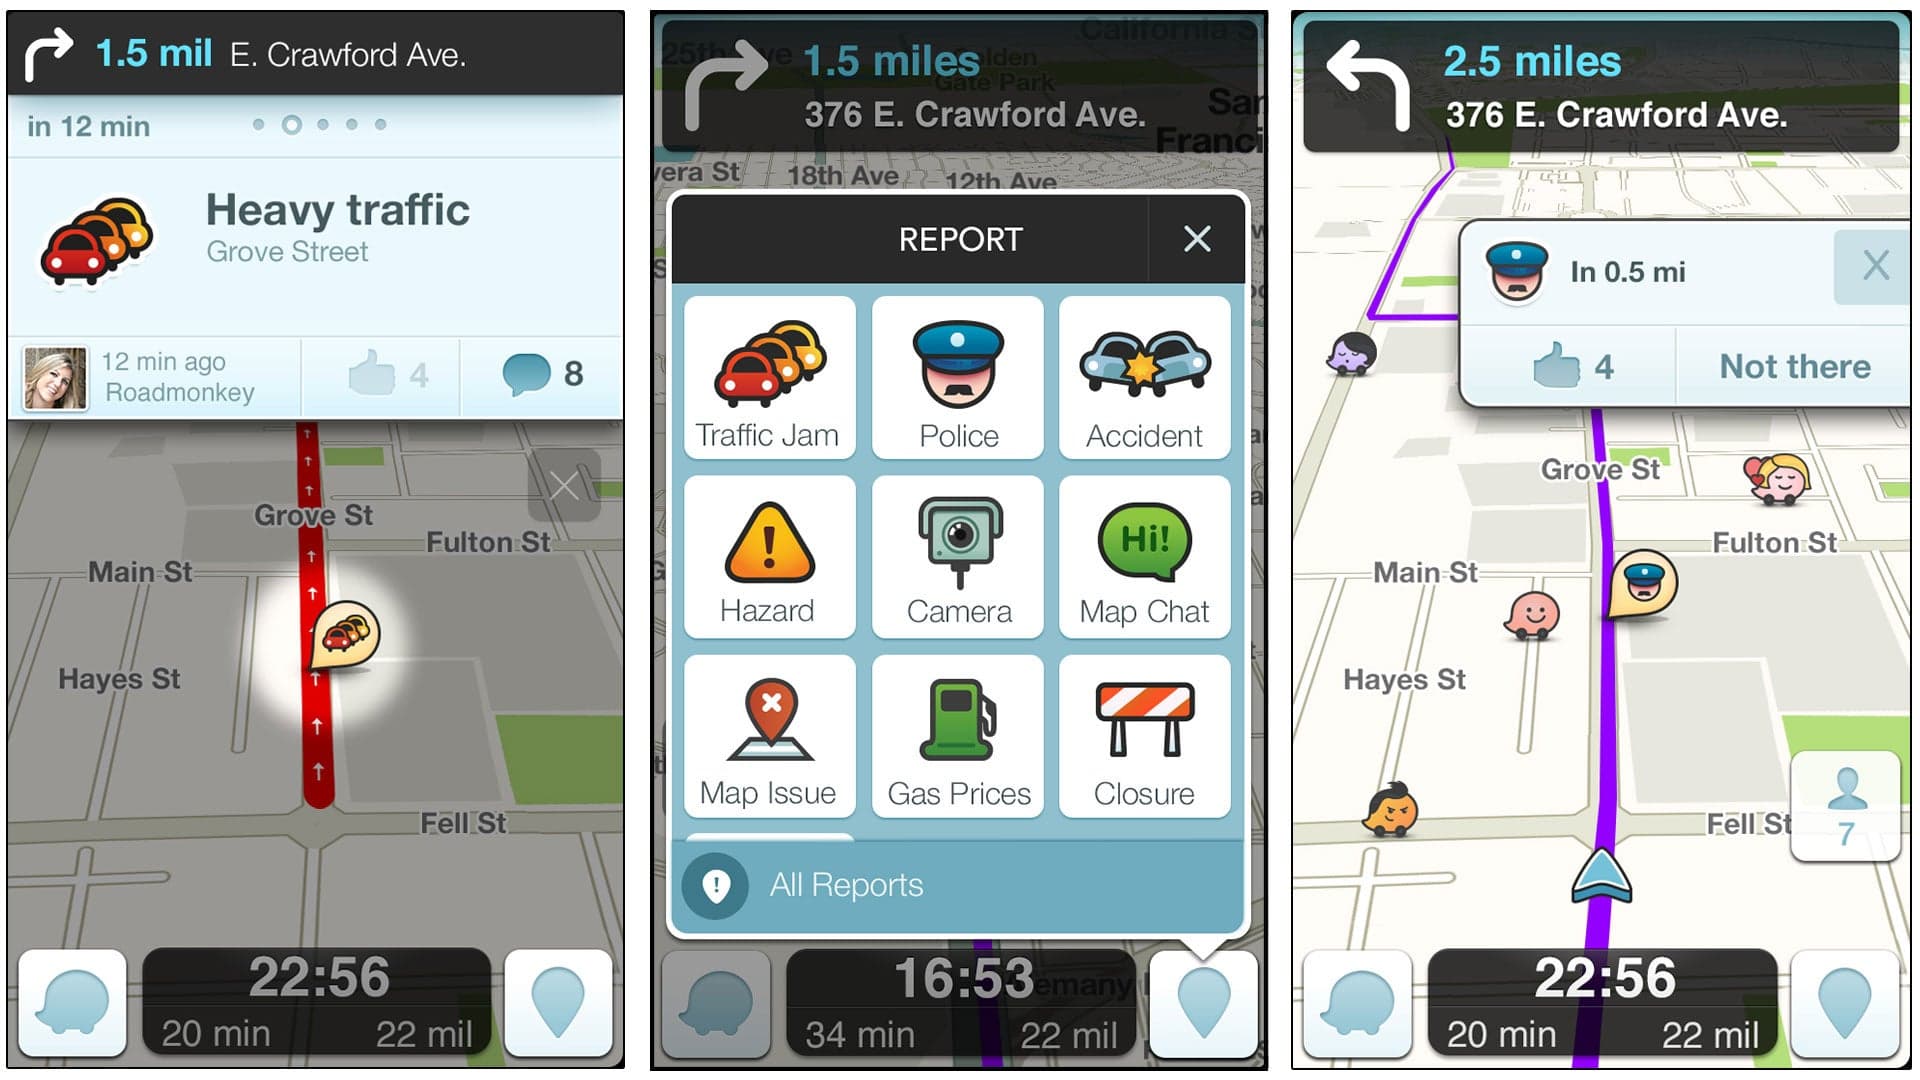 All Hail Waze, King of the Map Apps